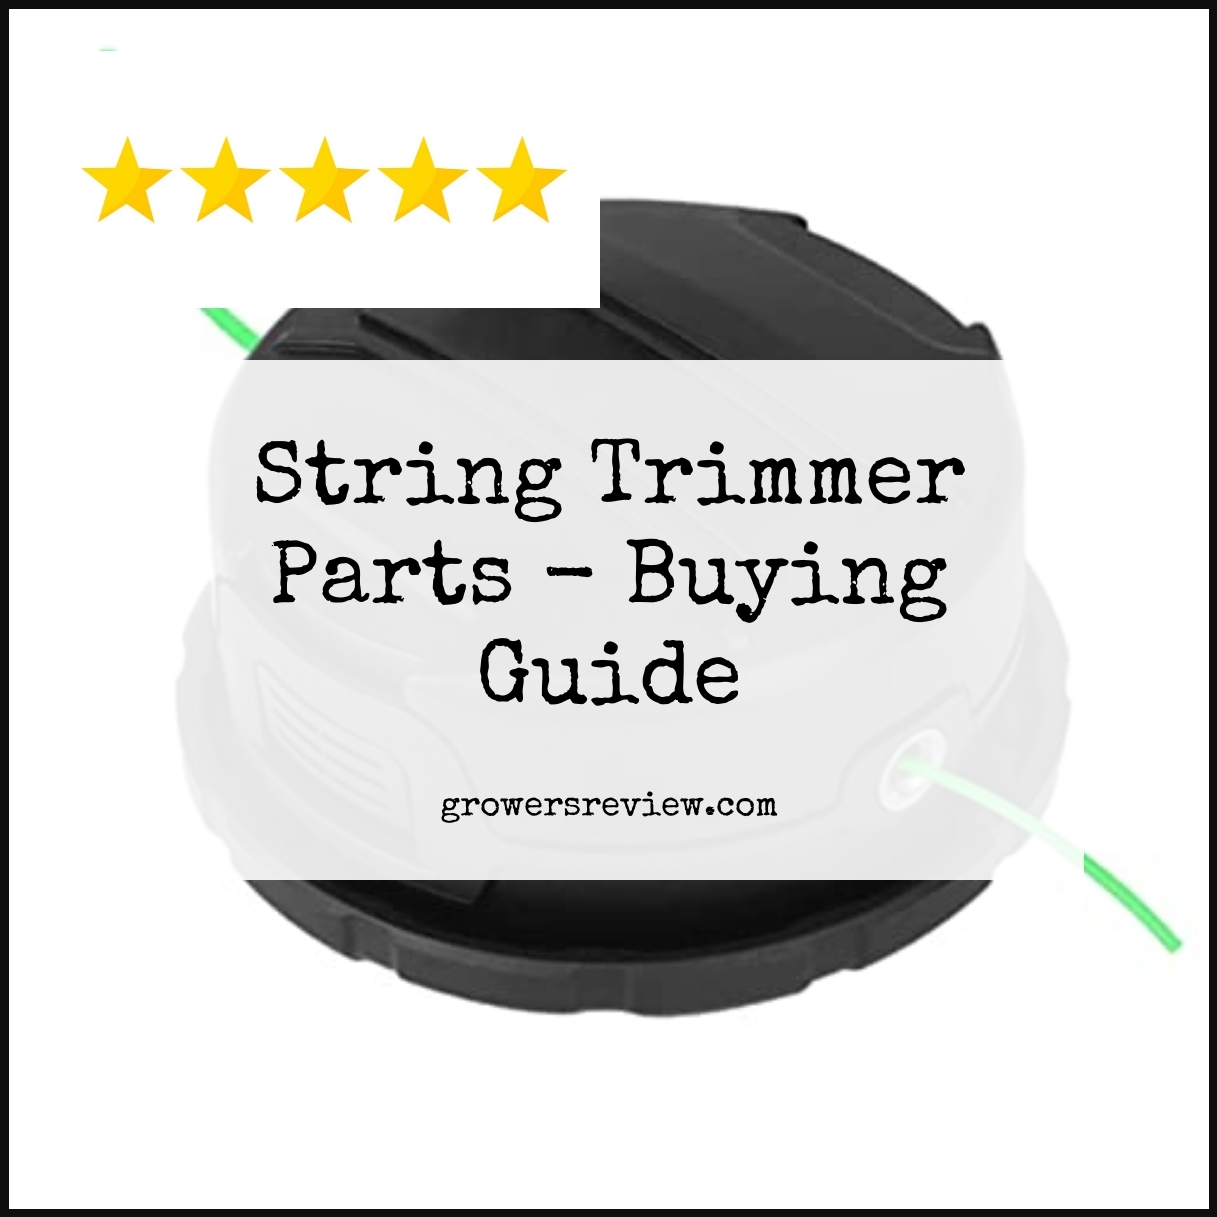 String Trimmer Parts - Buying Guide